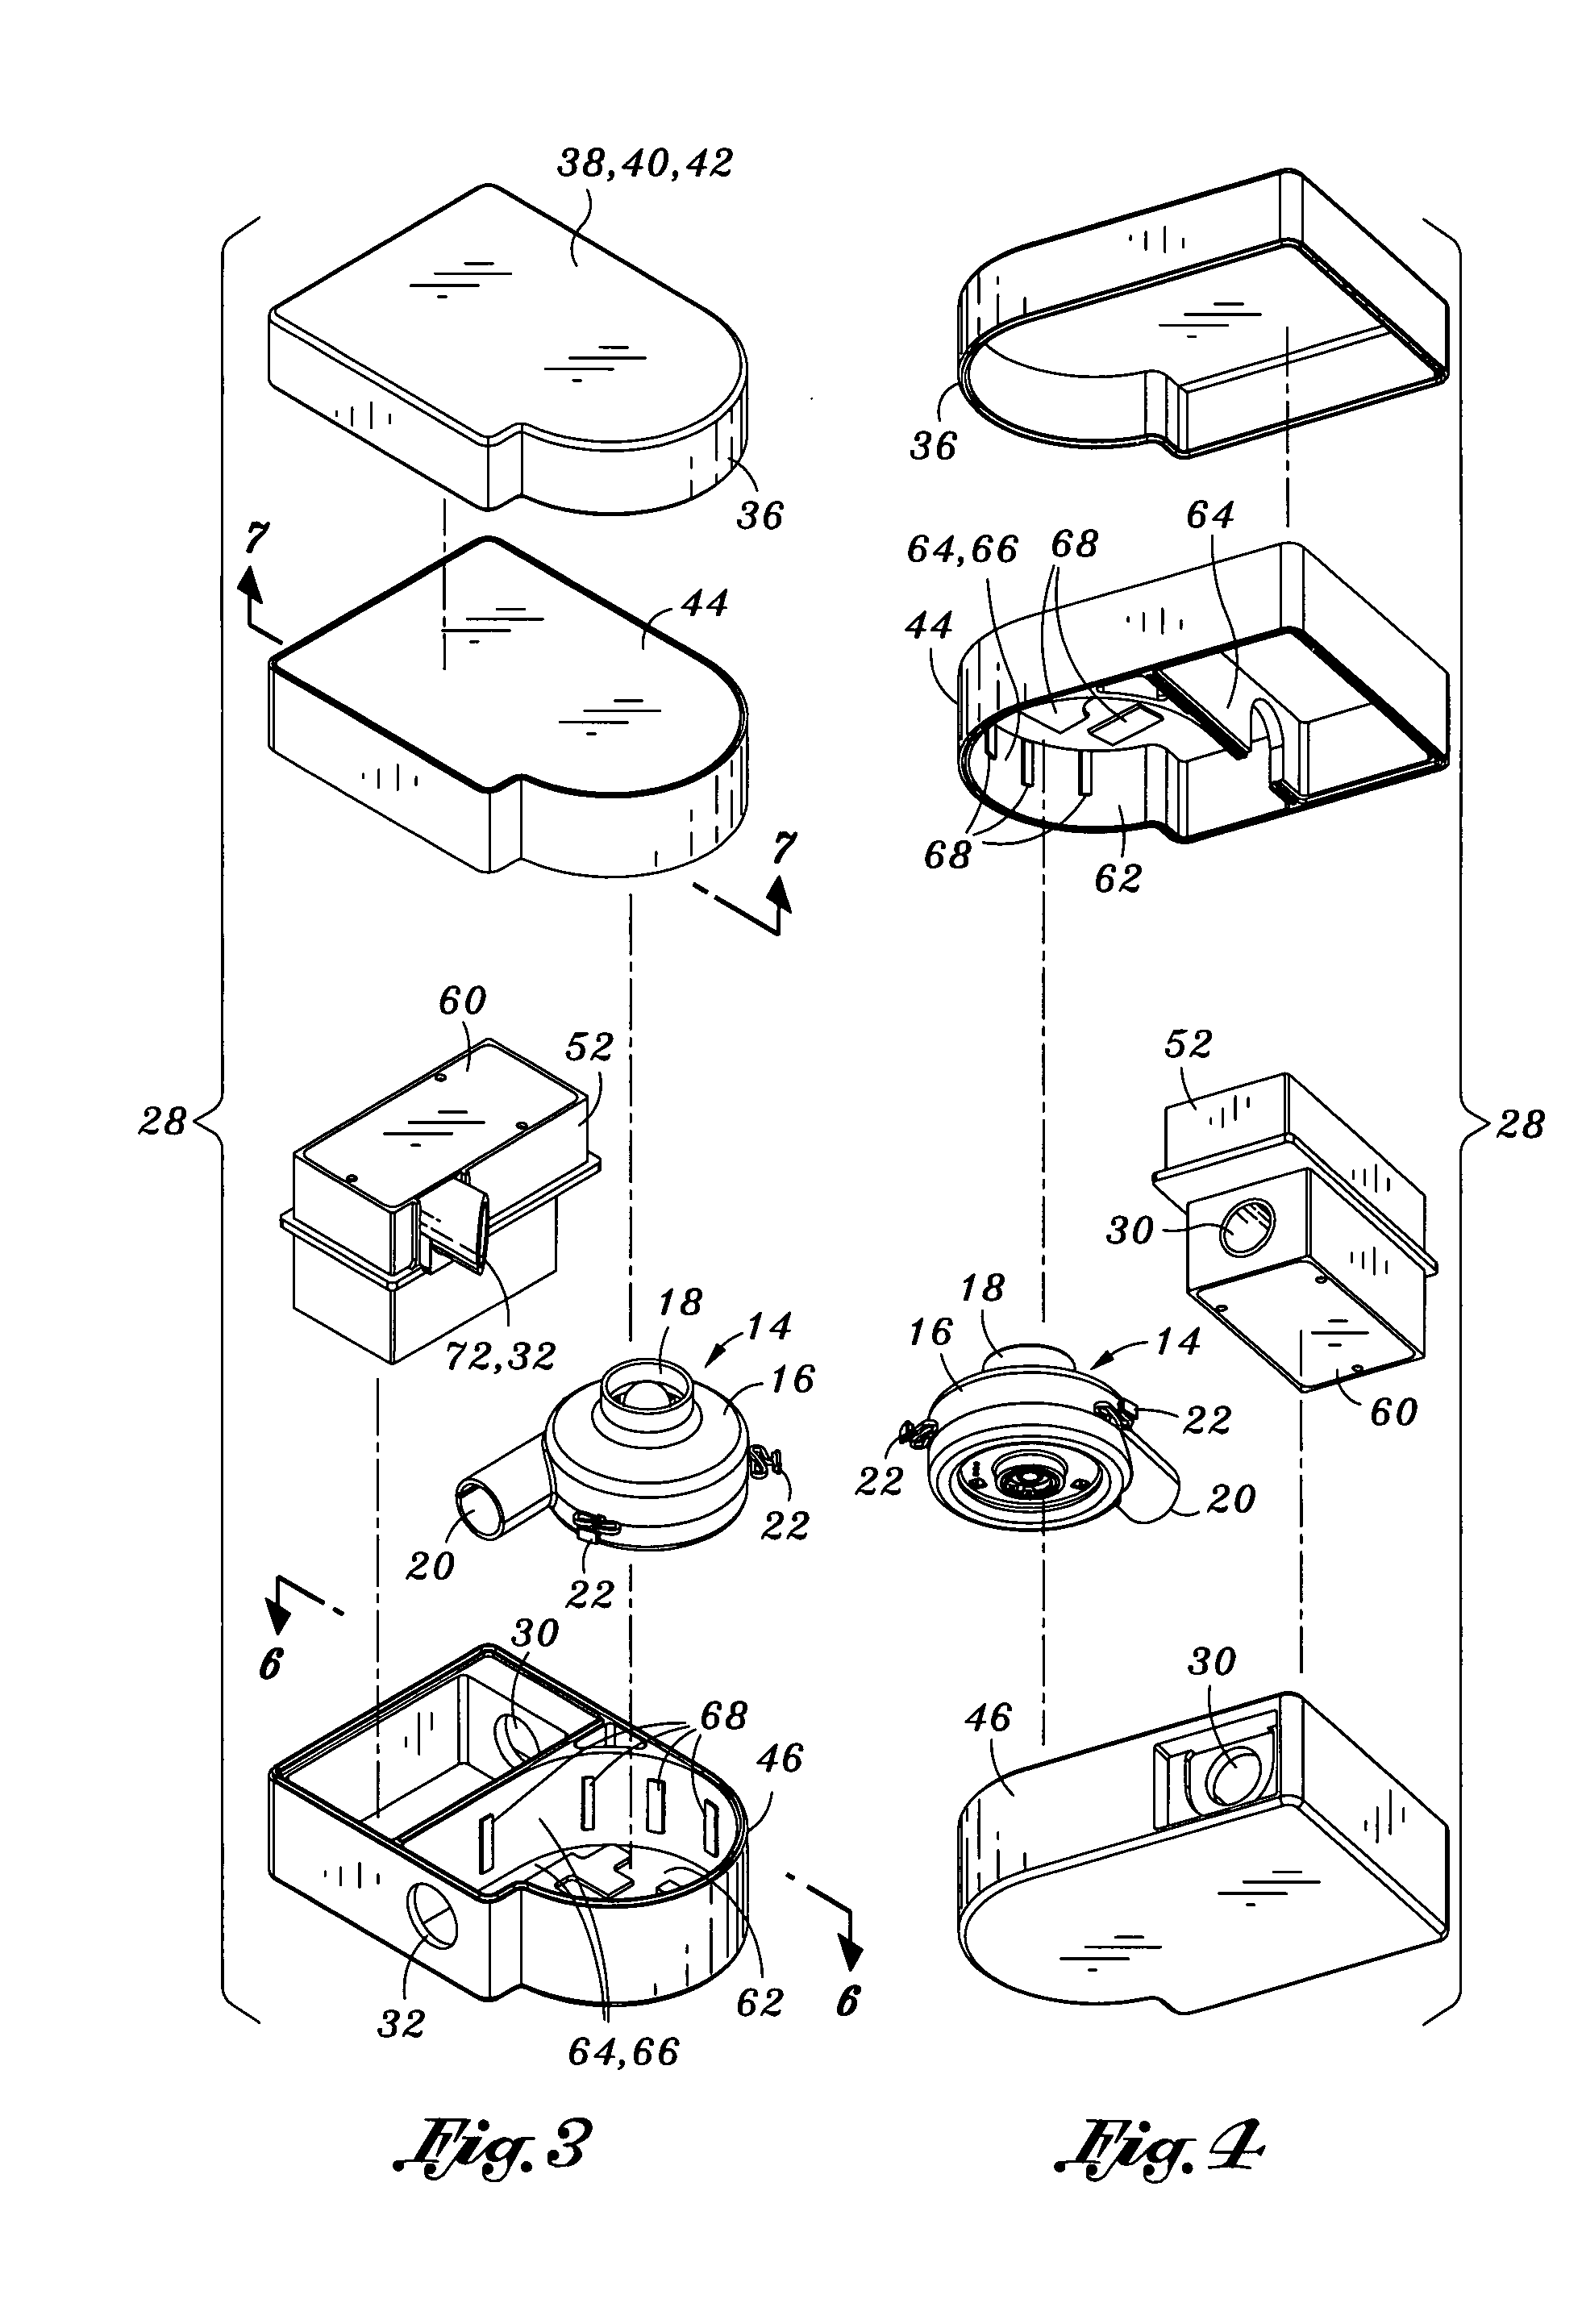 Acoustic attenuation chamber